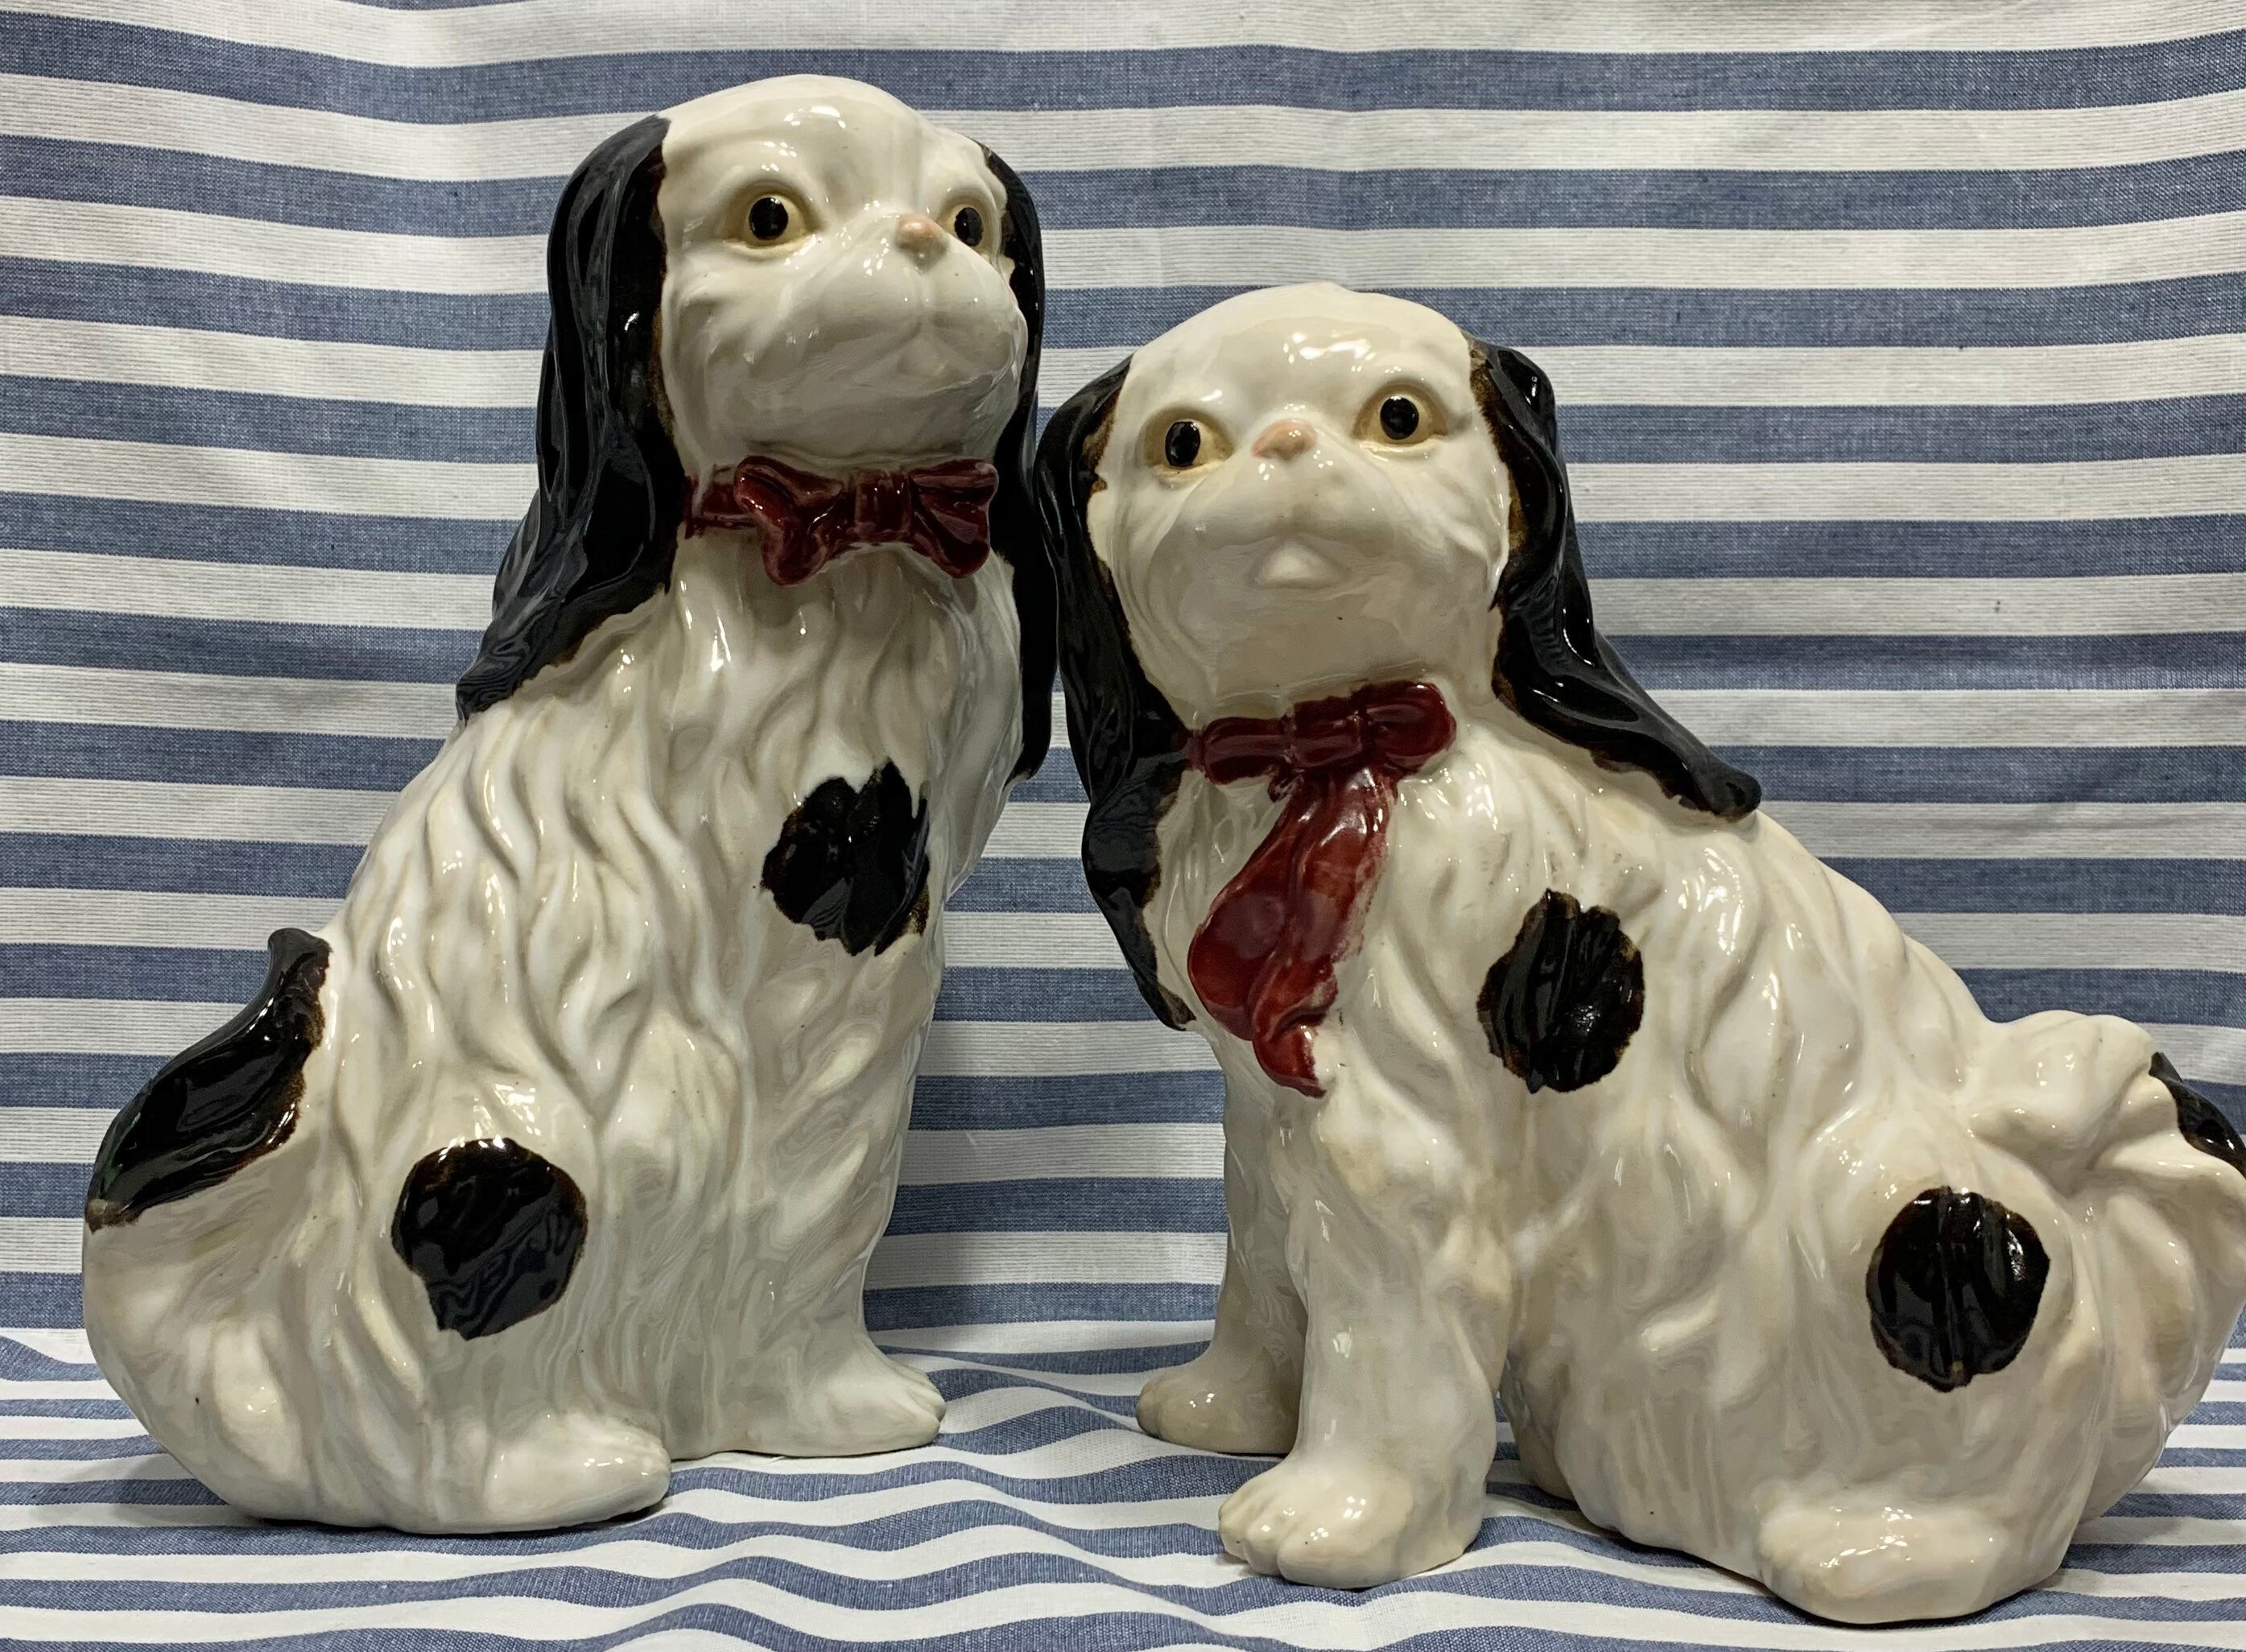 M7.4 1/12thDOLLS HOUSE ORNAMENTAL PAIR OF BLACK & WHITE STAFFORDSHIRE DOGS 